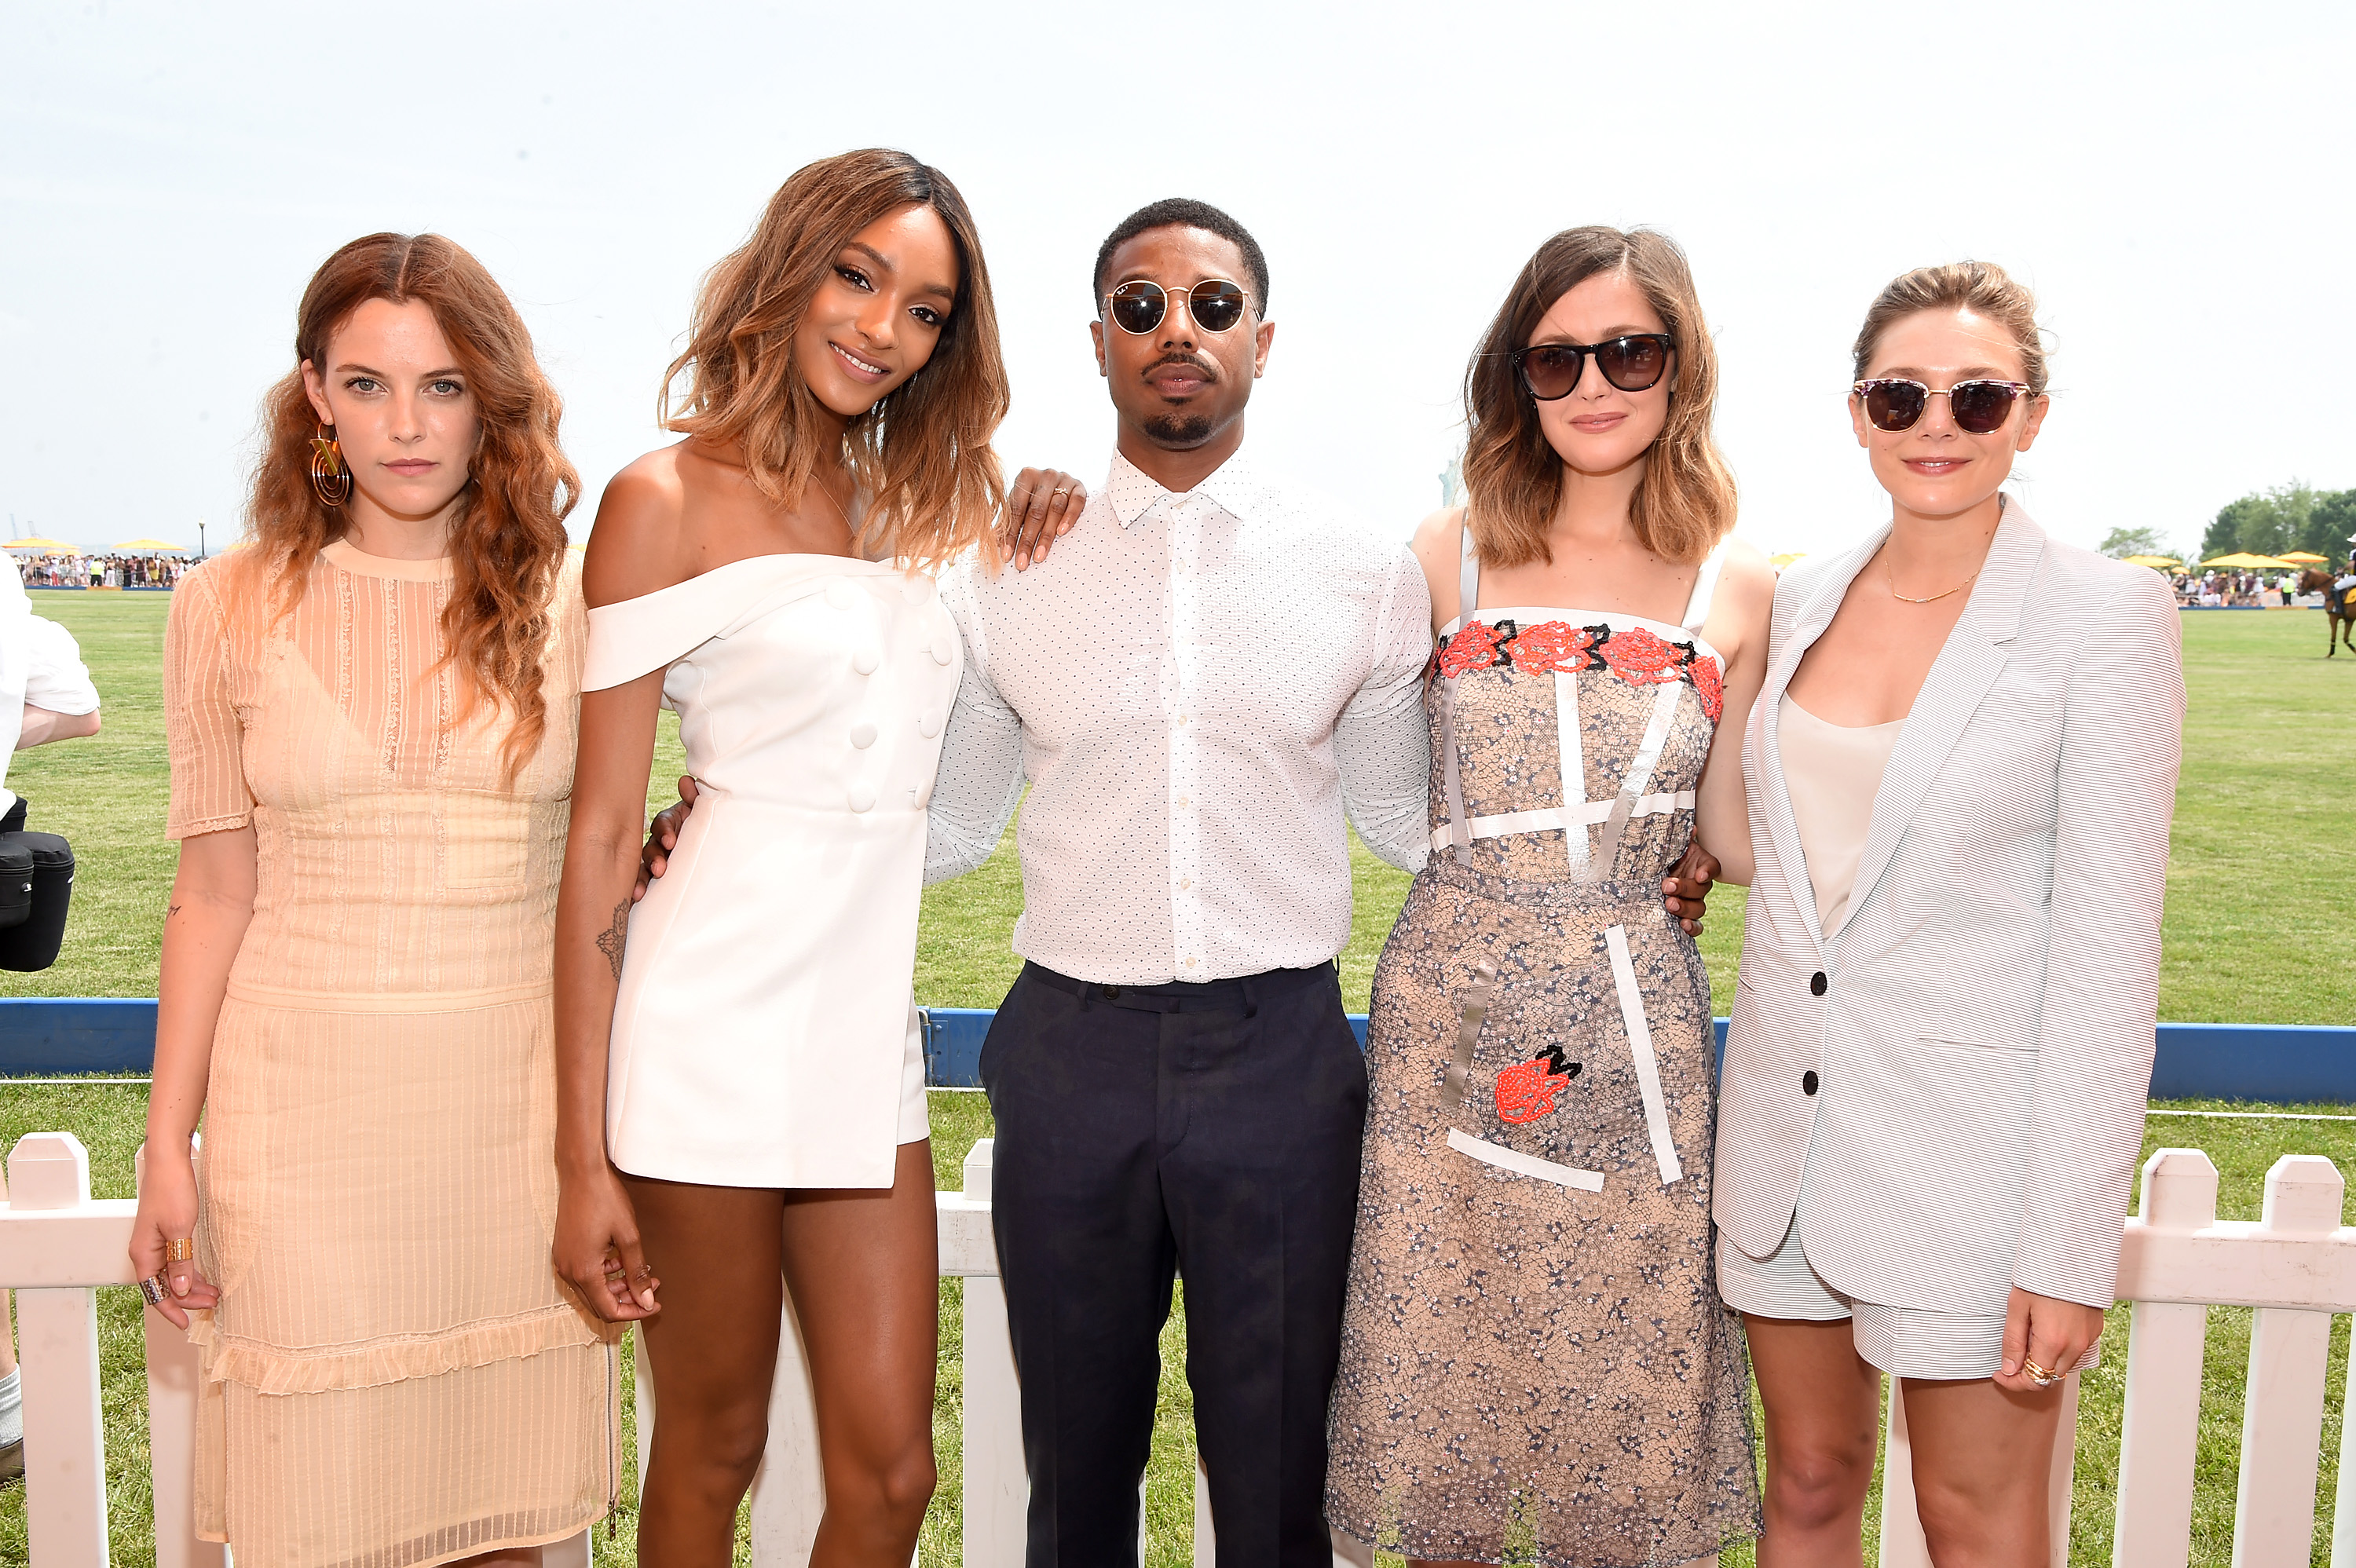 JERSEY CITY, NJ - JUNE 04:  (L-R) Riley Keough, Jourdan Dunn, Michael B. Jordan, Rose Byrne and Elizabeth Olsen attend the Ninth Annual Veuve Clicquot Polo Classic at Liberty State Park on June 4, 2016 in Jersey City, New Jersey.  (Photo by Jamie McCarthy/Getty Images for Veuve Clicquot)